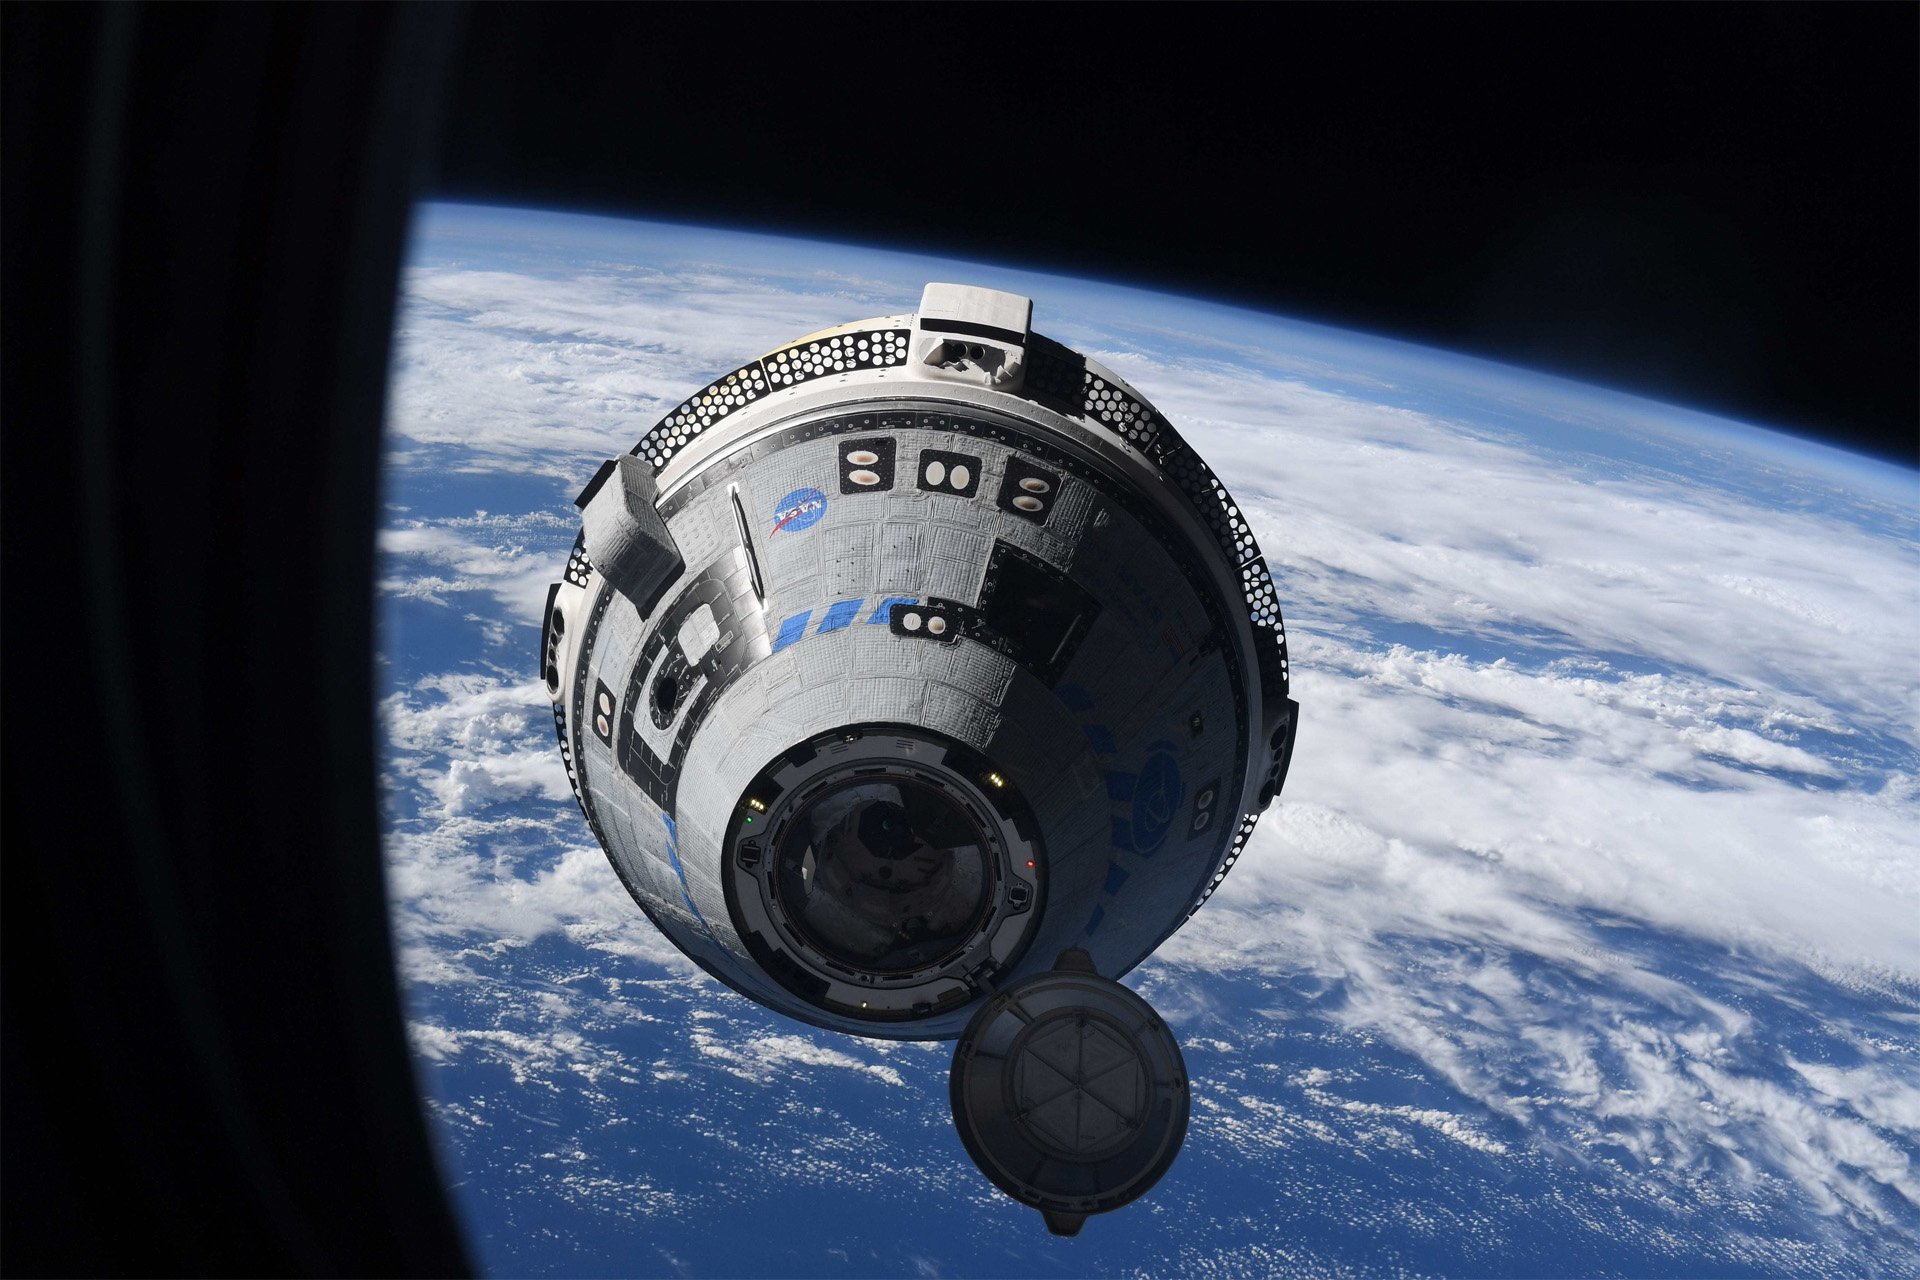 Boeing's Starliner OFT-2 spacecraft approaches the International Space Station in this stunning photo by European Space Agency astronaut Samantha Cristoforetti.